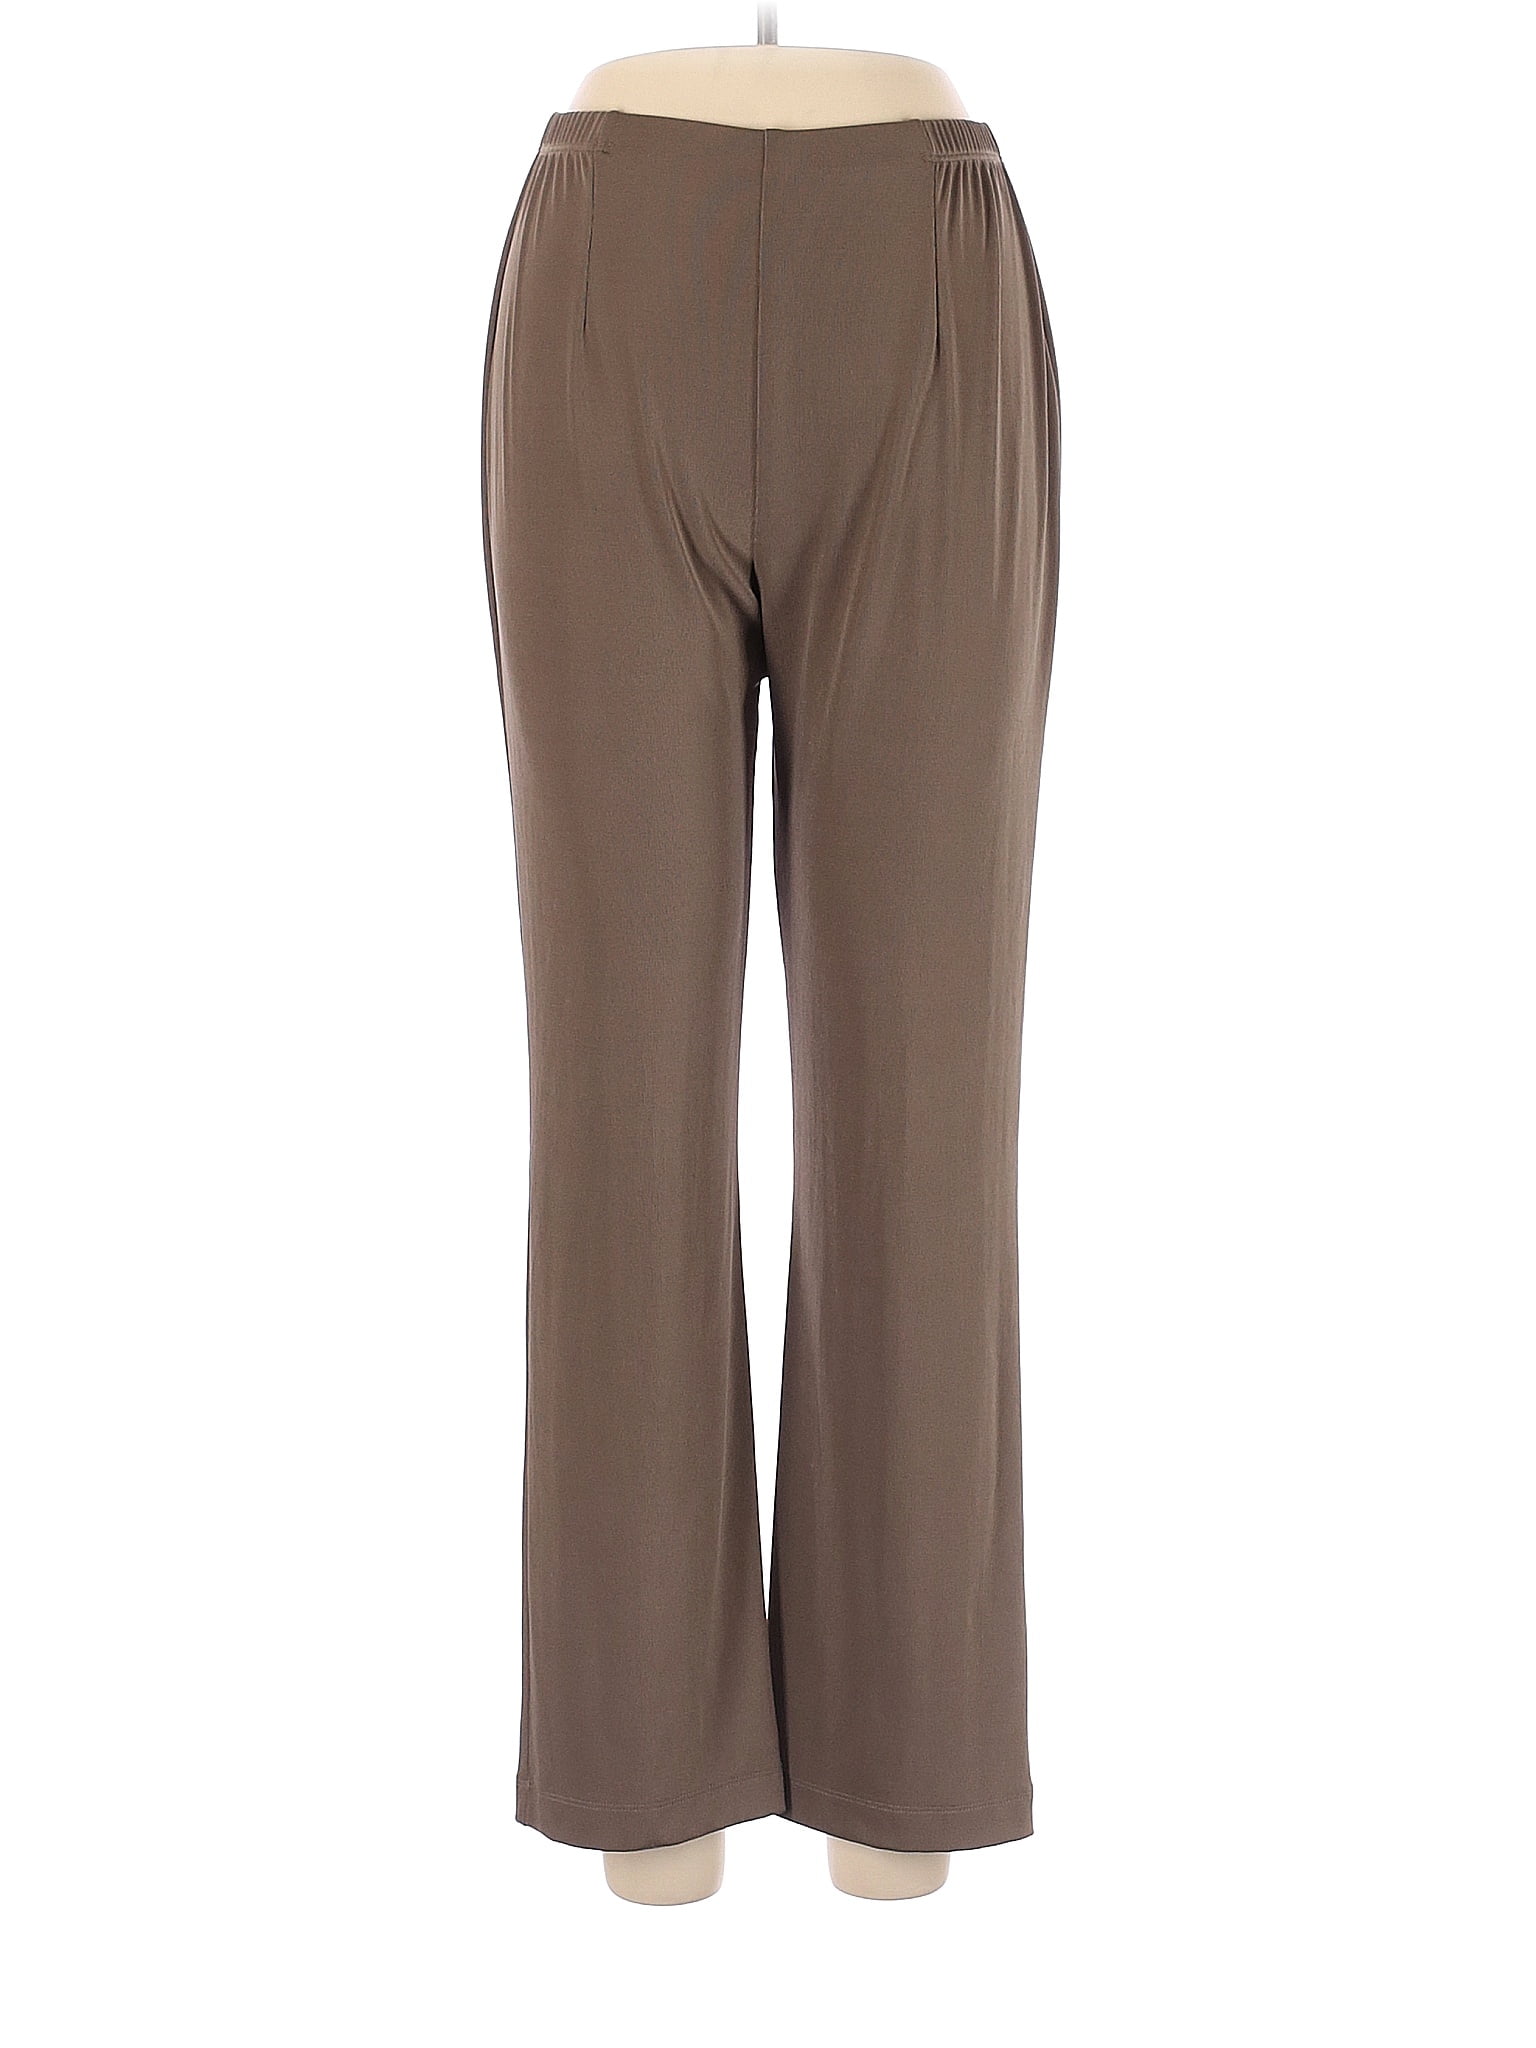 Pants, Cheap Chico's & Winona Shop Online Outlet For Womens